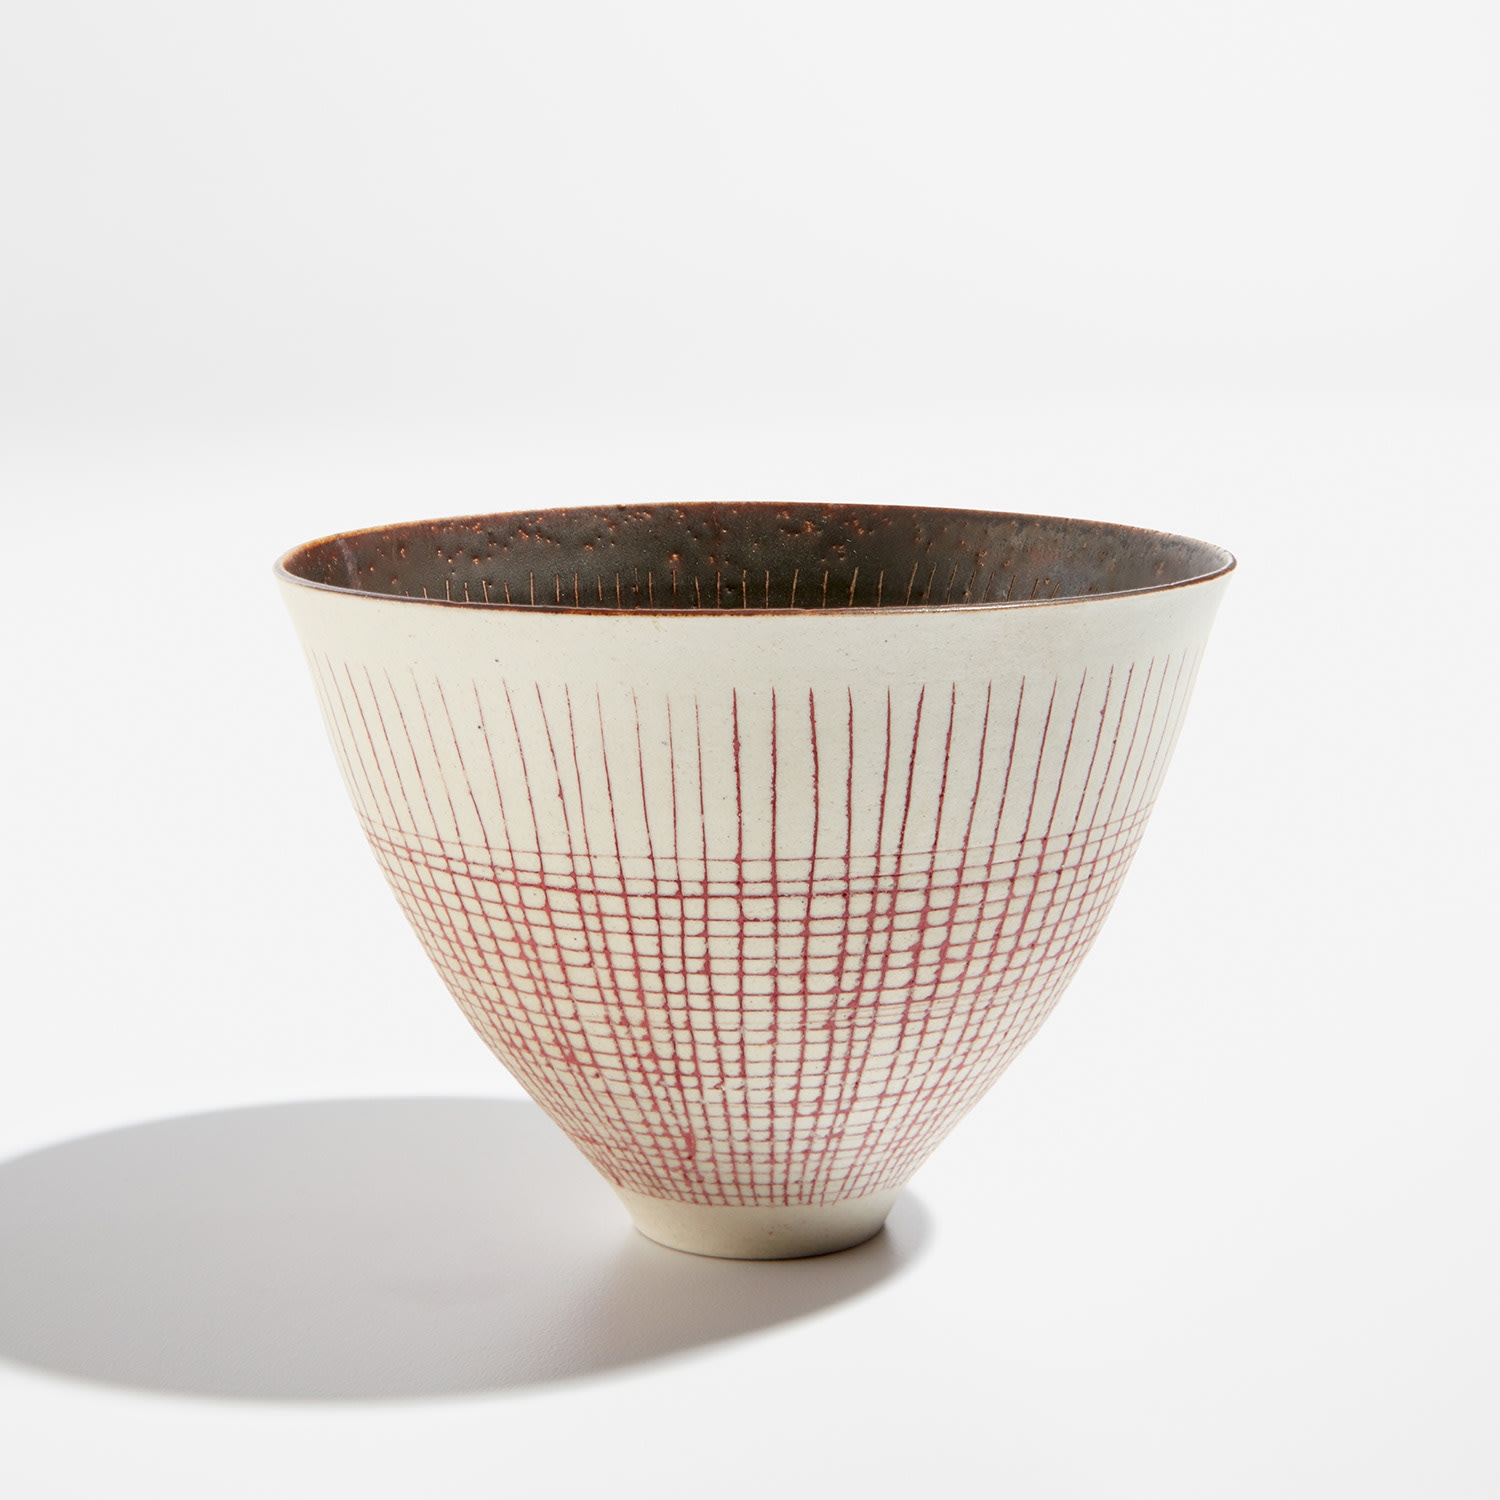 Lucie Rie, Conical bowl